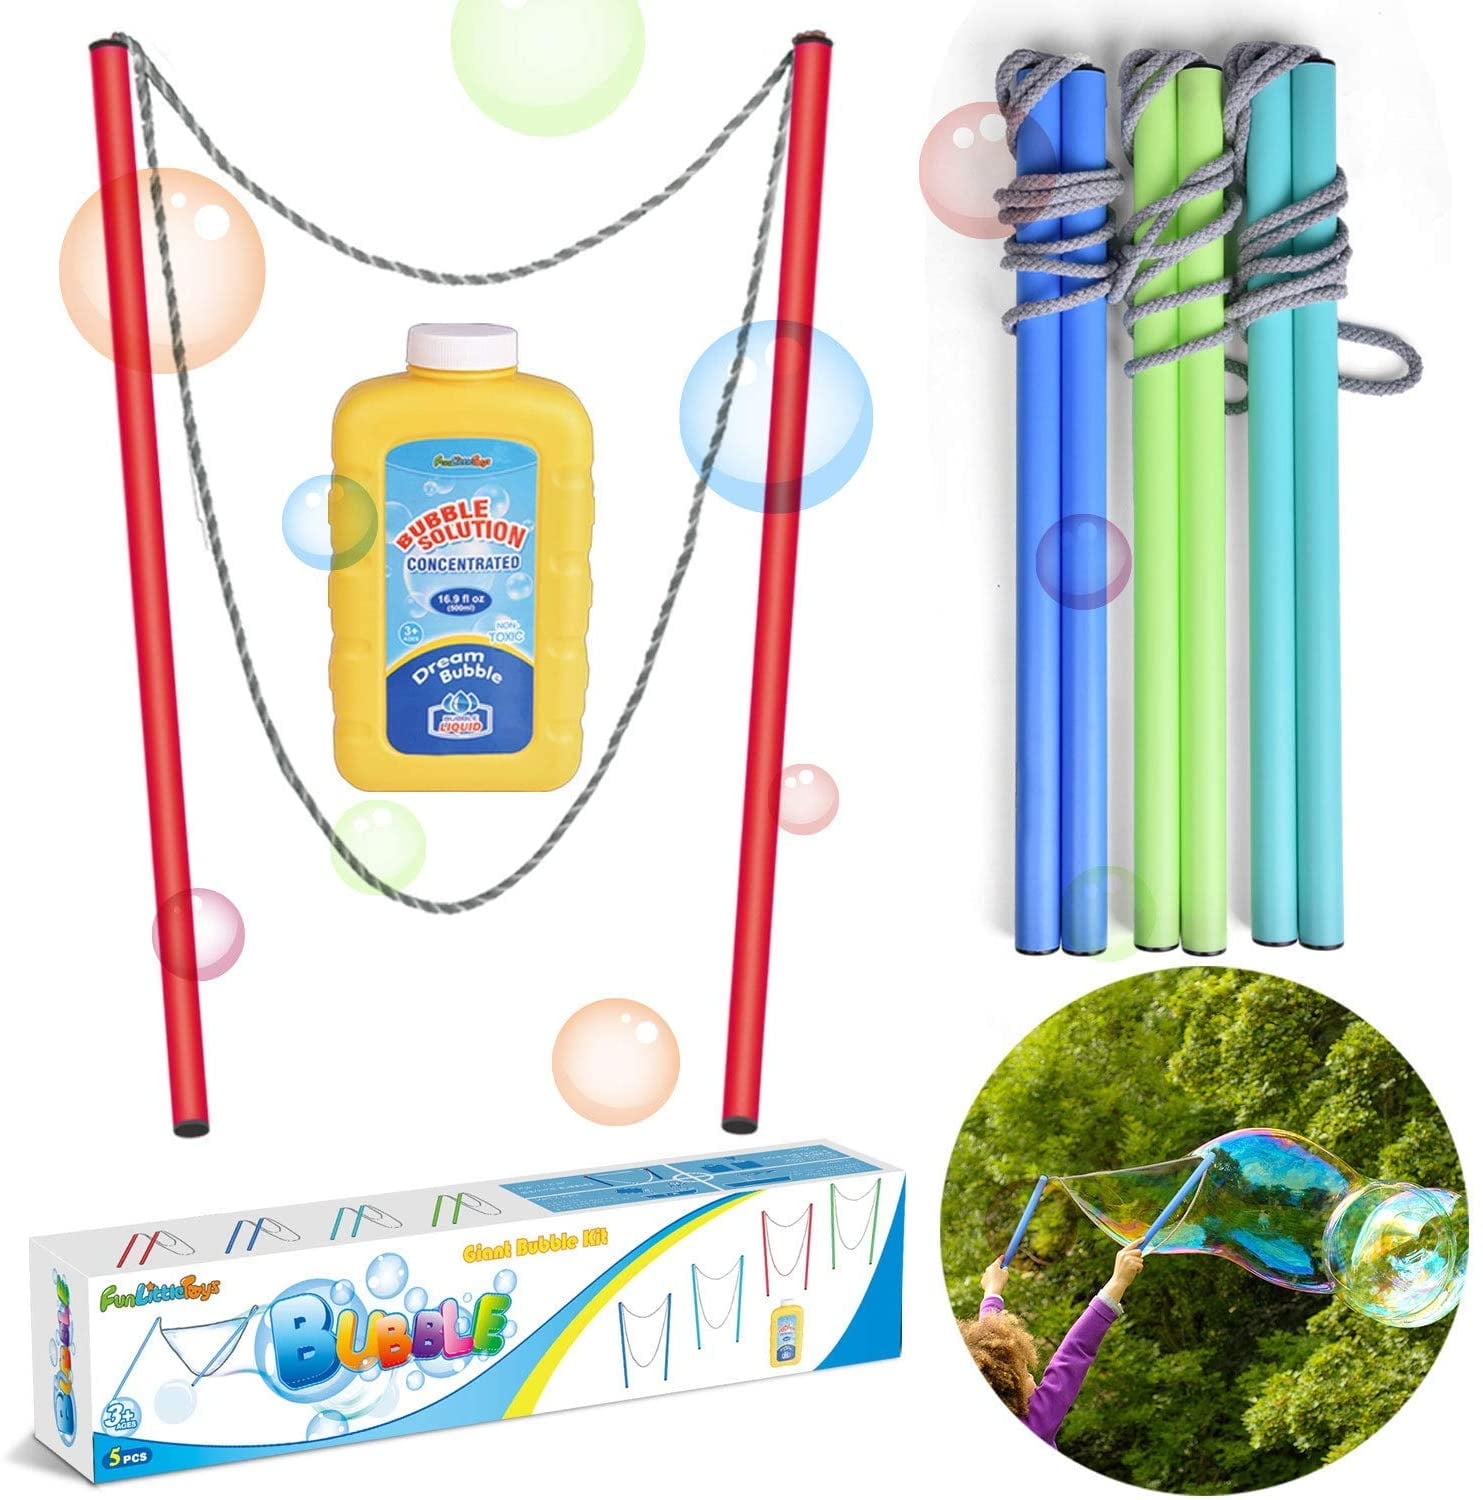 FunLittleToy 4 Pack 17 Inch Giant Bubble Wands with Bubble Solution Bubble Party Favorsfor Kids Outdoor Toys Summer Activities 